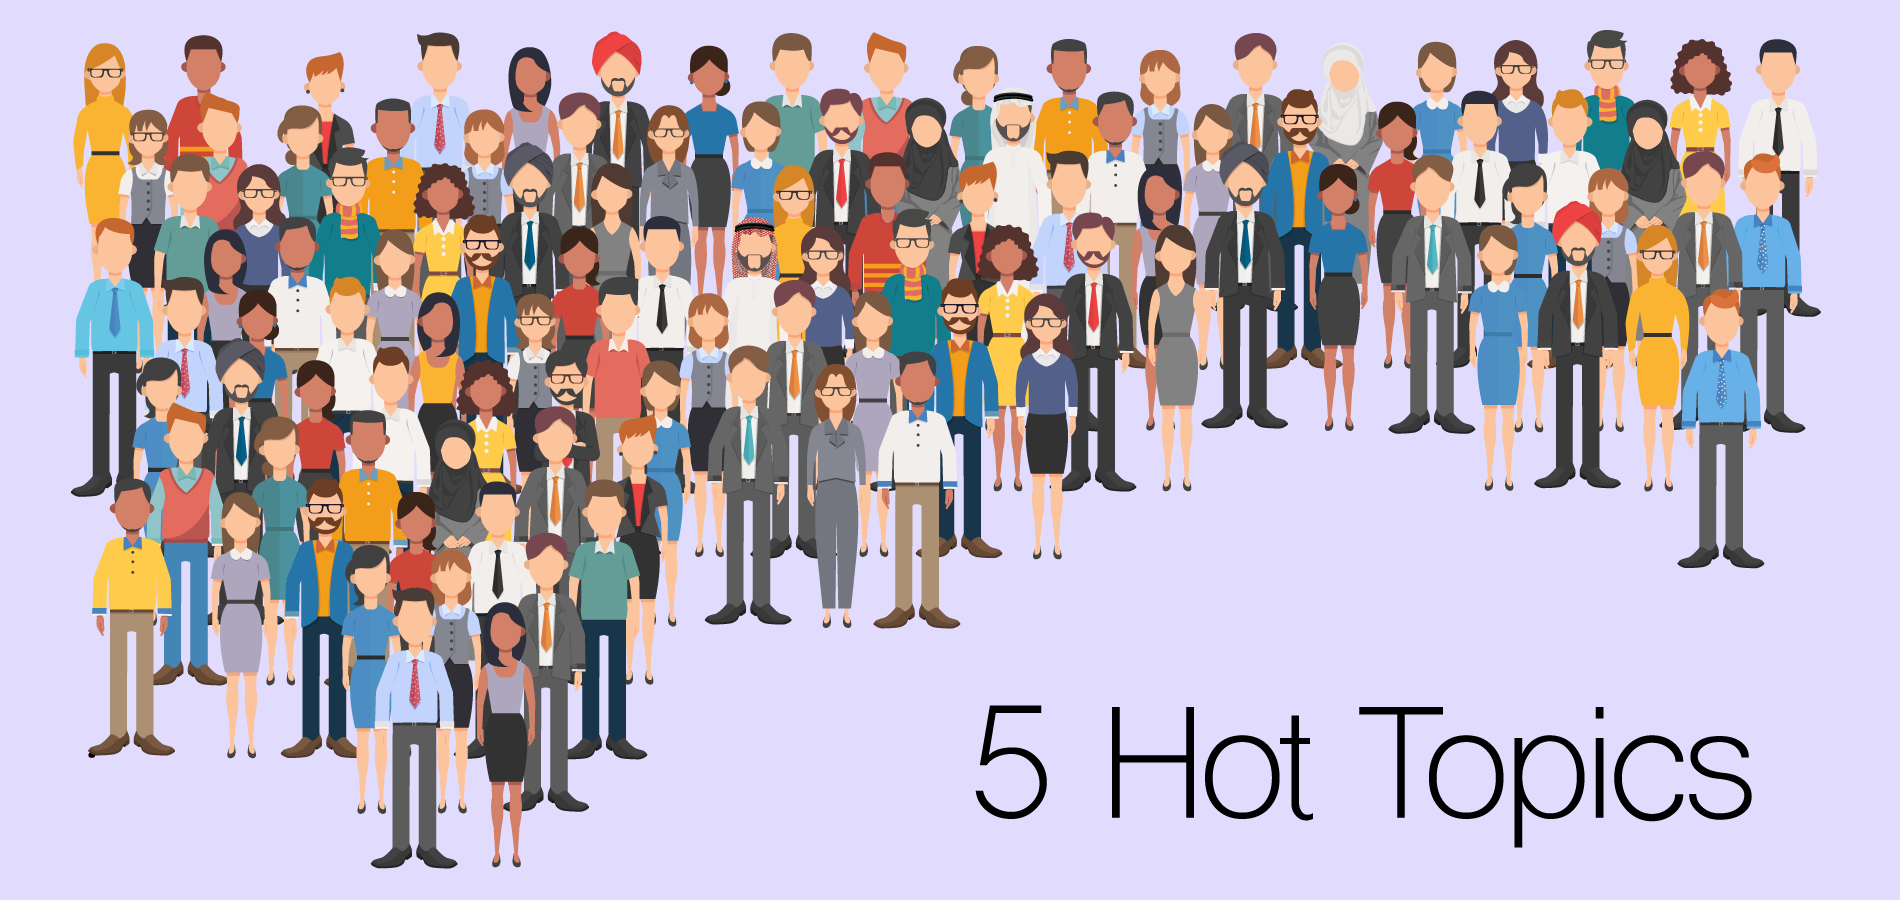 5 hot topics for small business community you should know